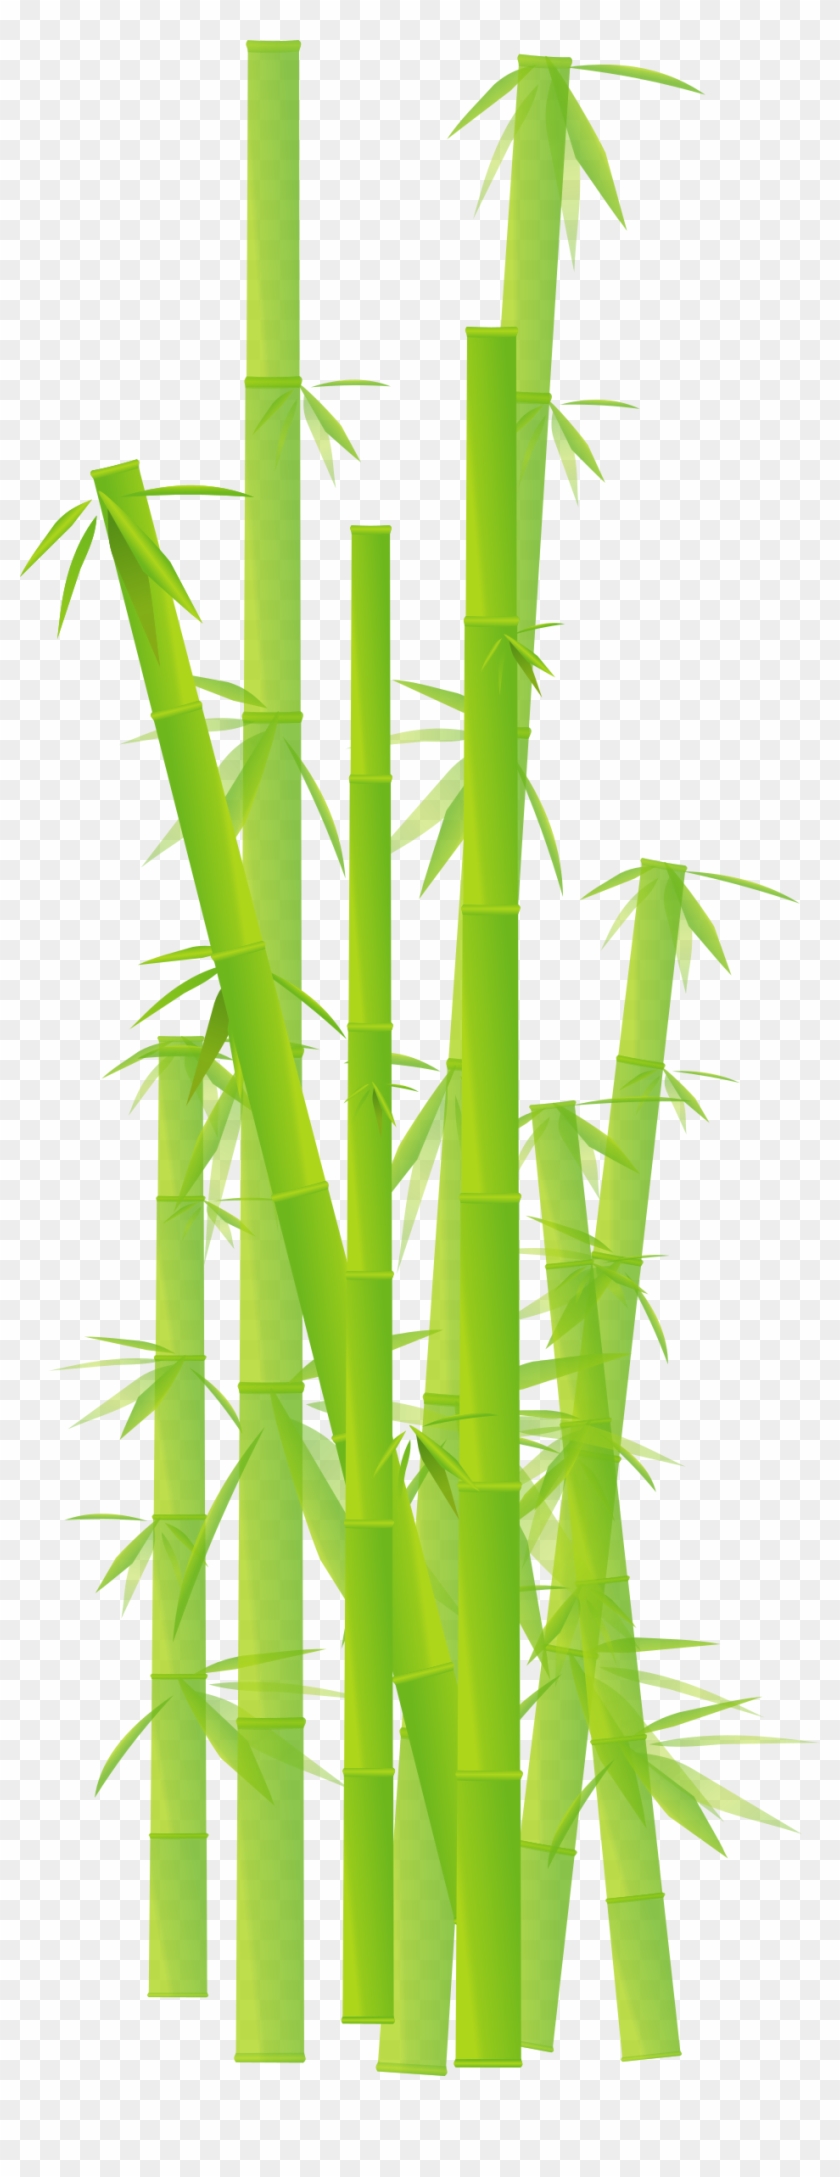 Bamboo - Bamboo Clipart Transparent Background #384748